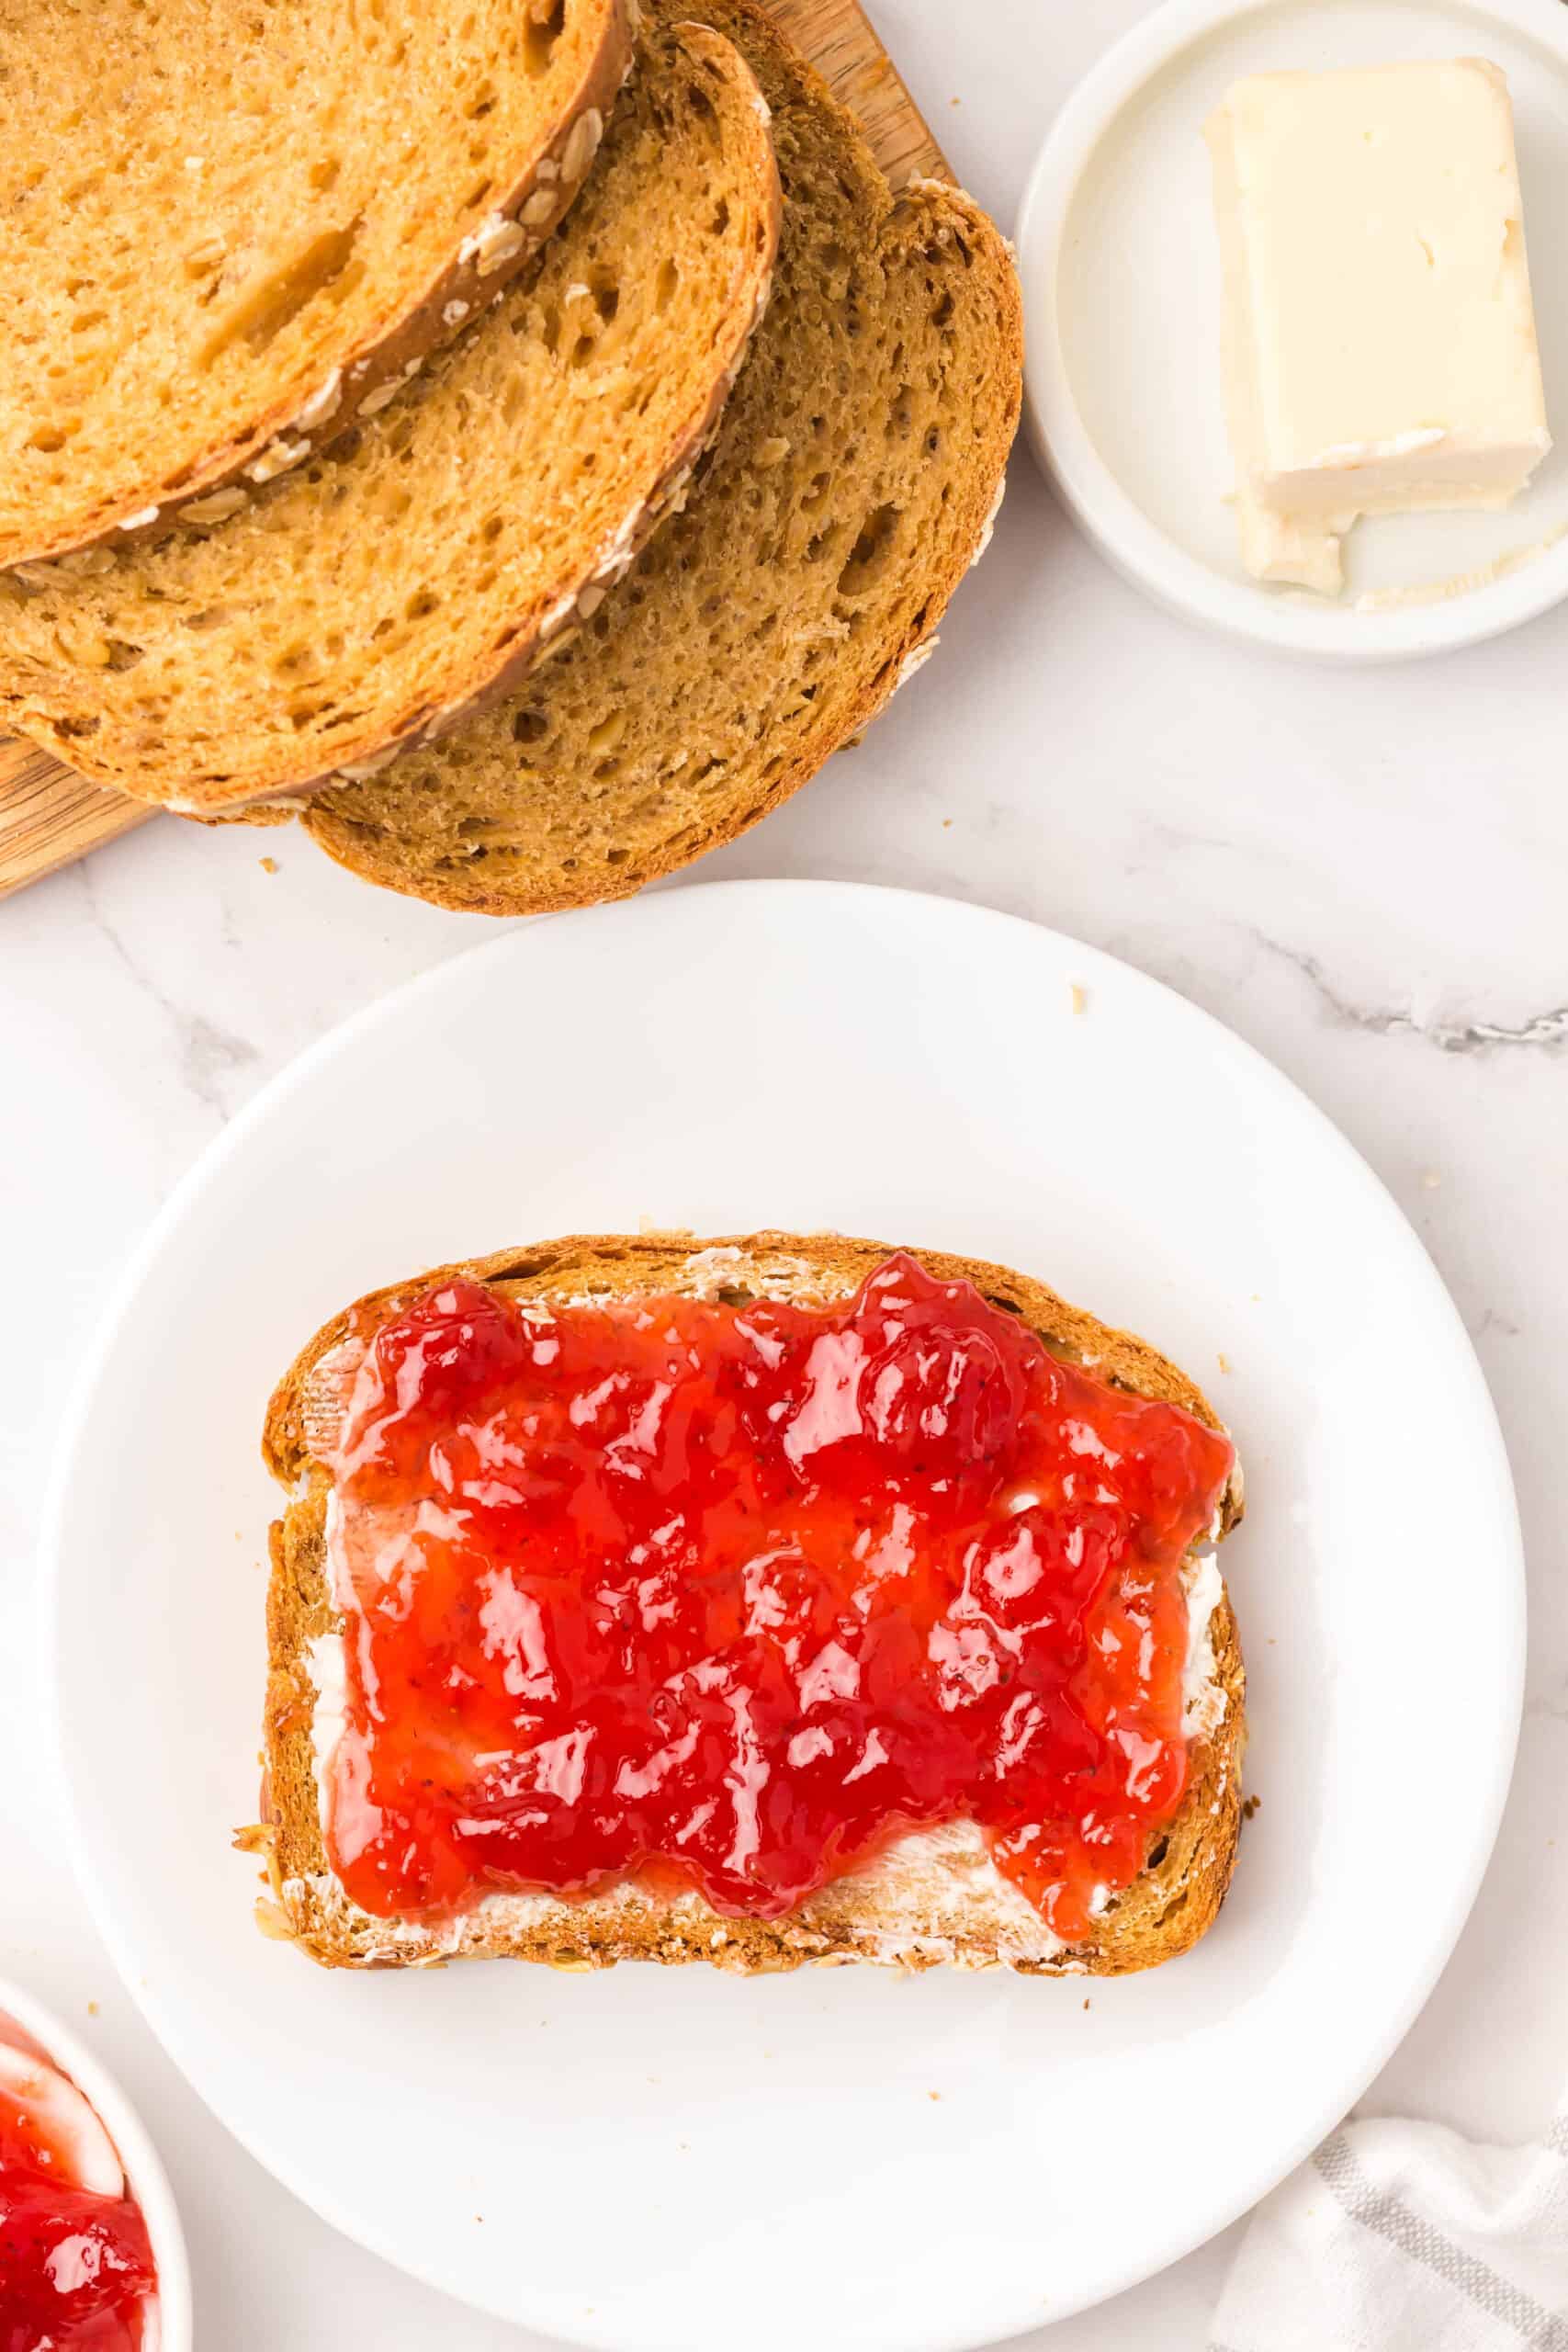 Slice of bread spread with butter and berry jam on a plate.